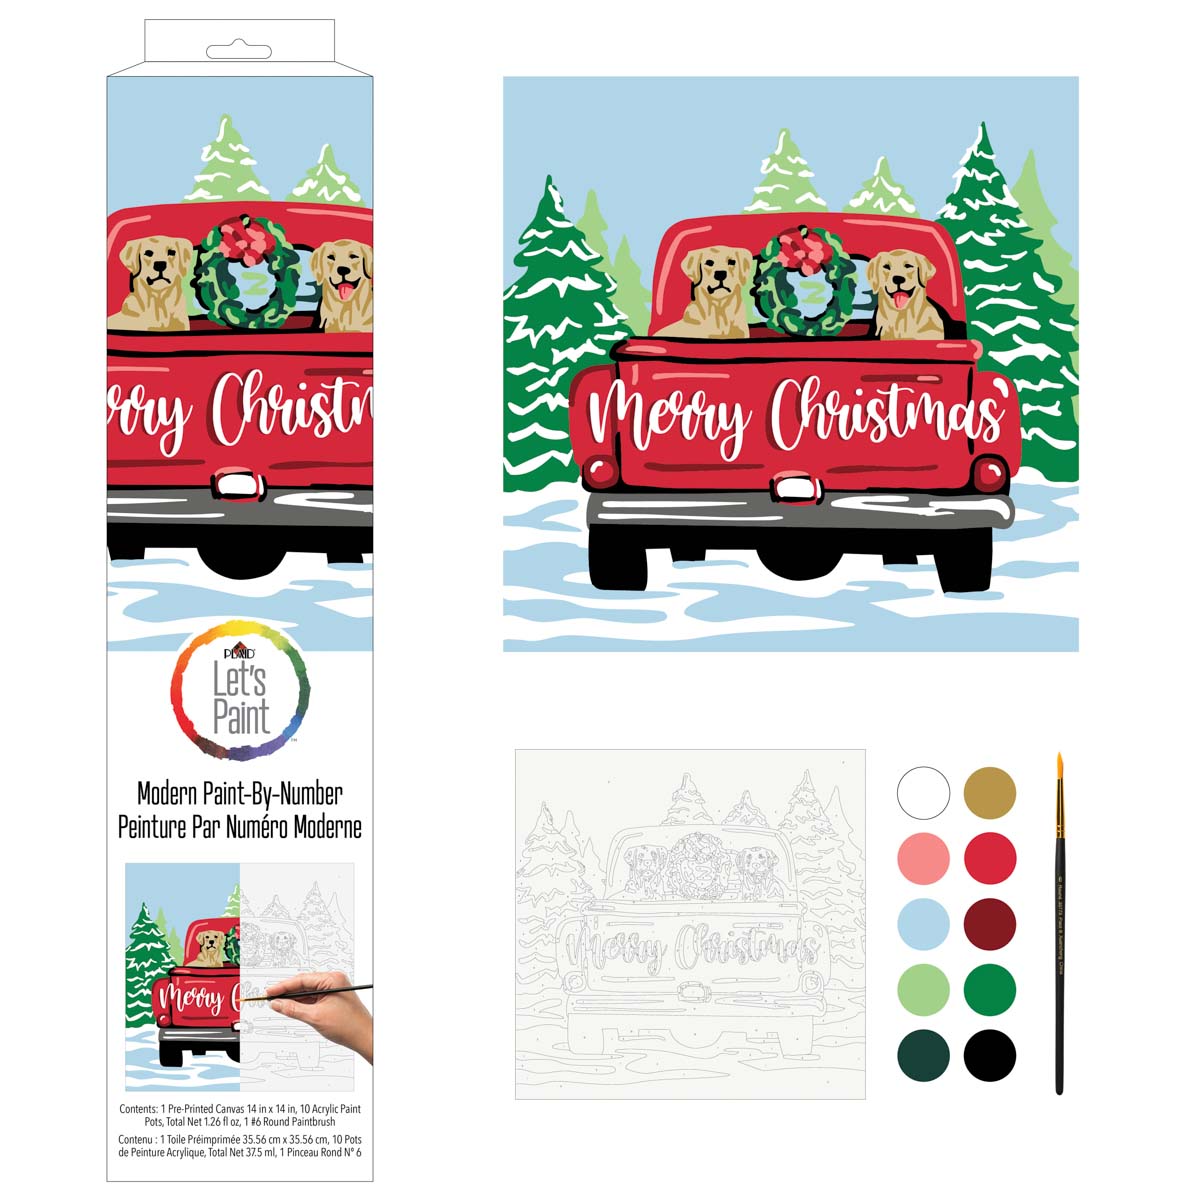 Plaid ® Let's Paint™ Modern Paint-by-Number - Christmas Labs - 17925